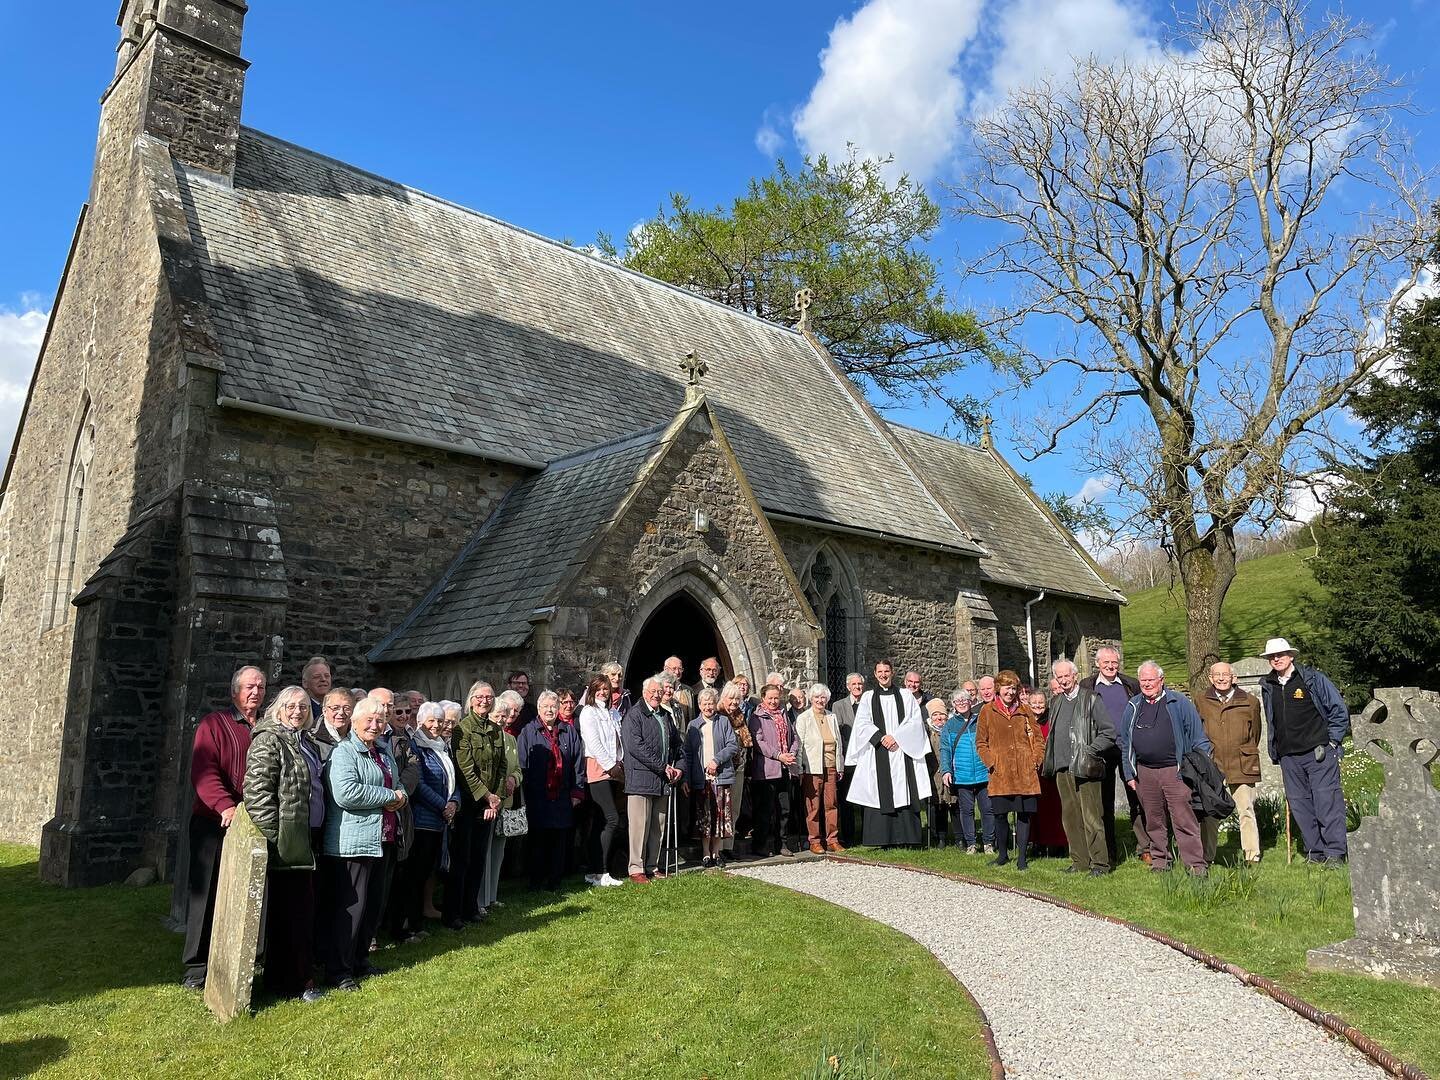 We had a great turnout for our Songs of Praise service celebrating the 175th anniversary of St Mark&rsquo;s Church on the 24th April 2022, with people travelling from Sedbergh, Dent, Kendal and even Shropshire to attend. Follow the link for photos an